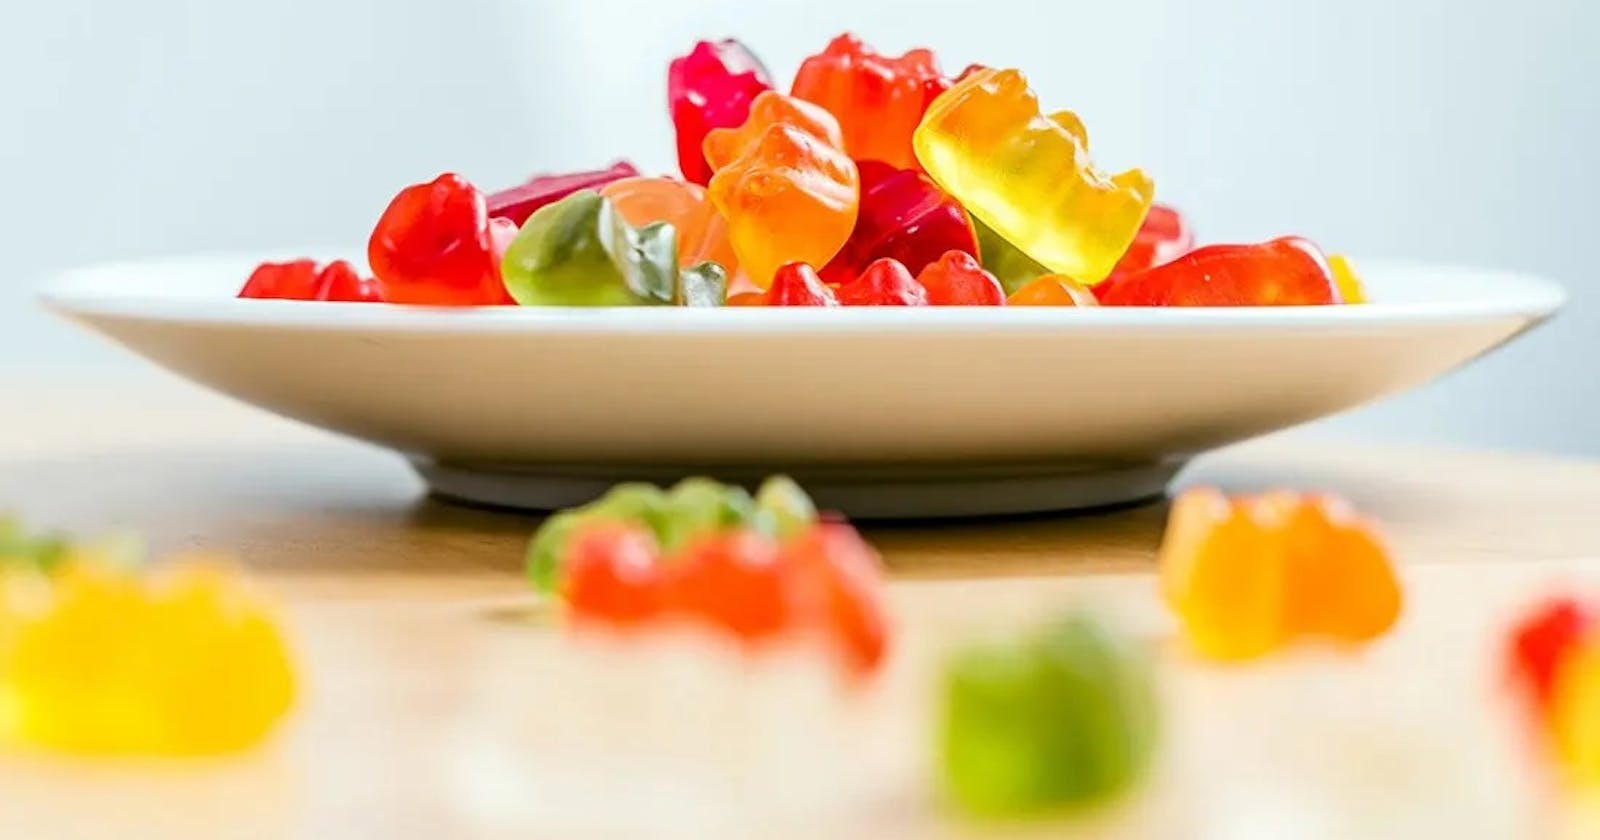 Walgreens CBD Gummies - are made from 100% Safe And Potent Ingredients!